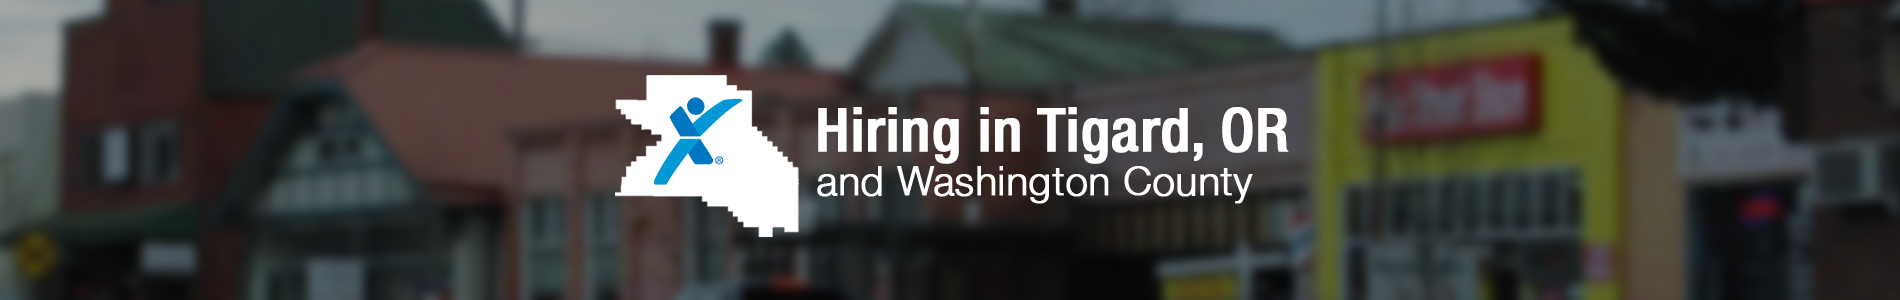 Hiring in Tigard, OR - Apply today!